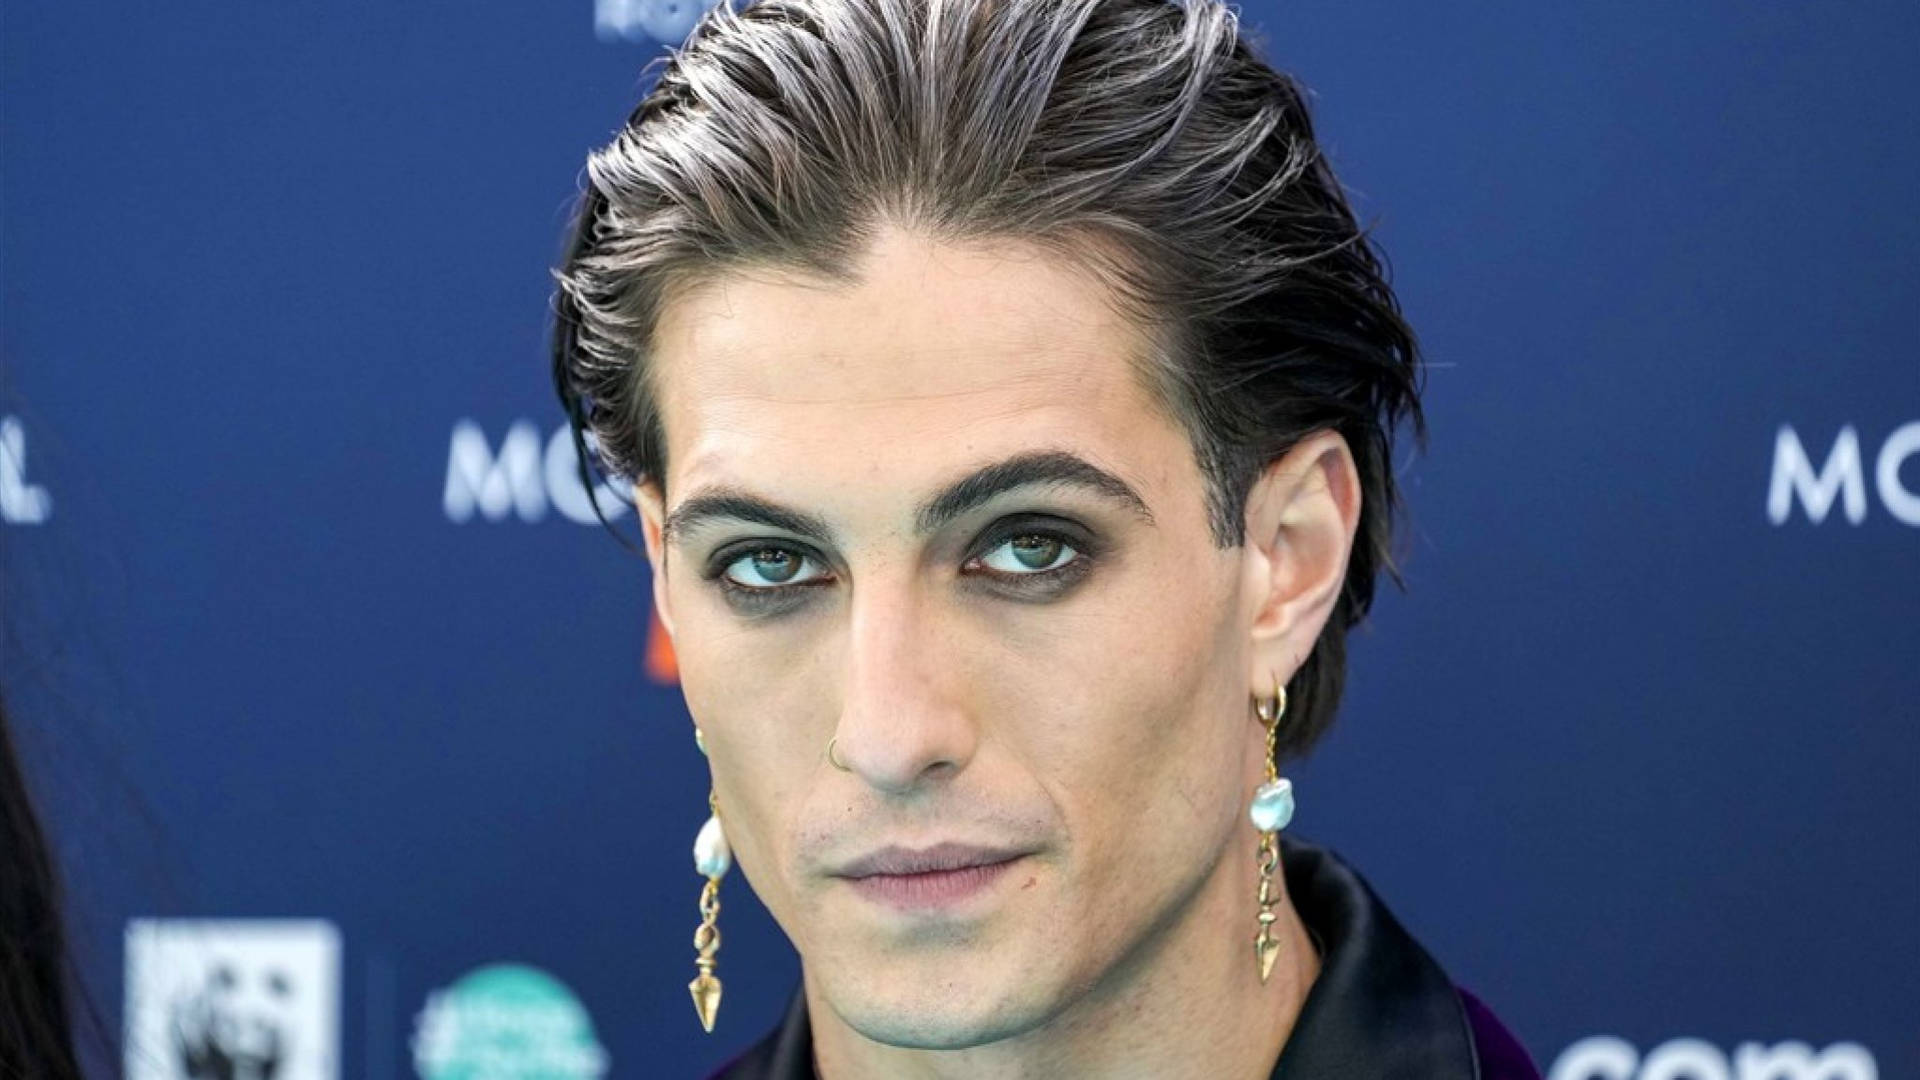 Maneskin Vocalist Damiano With Dangling Earring Background